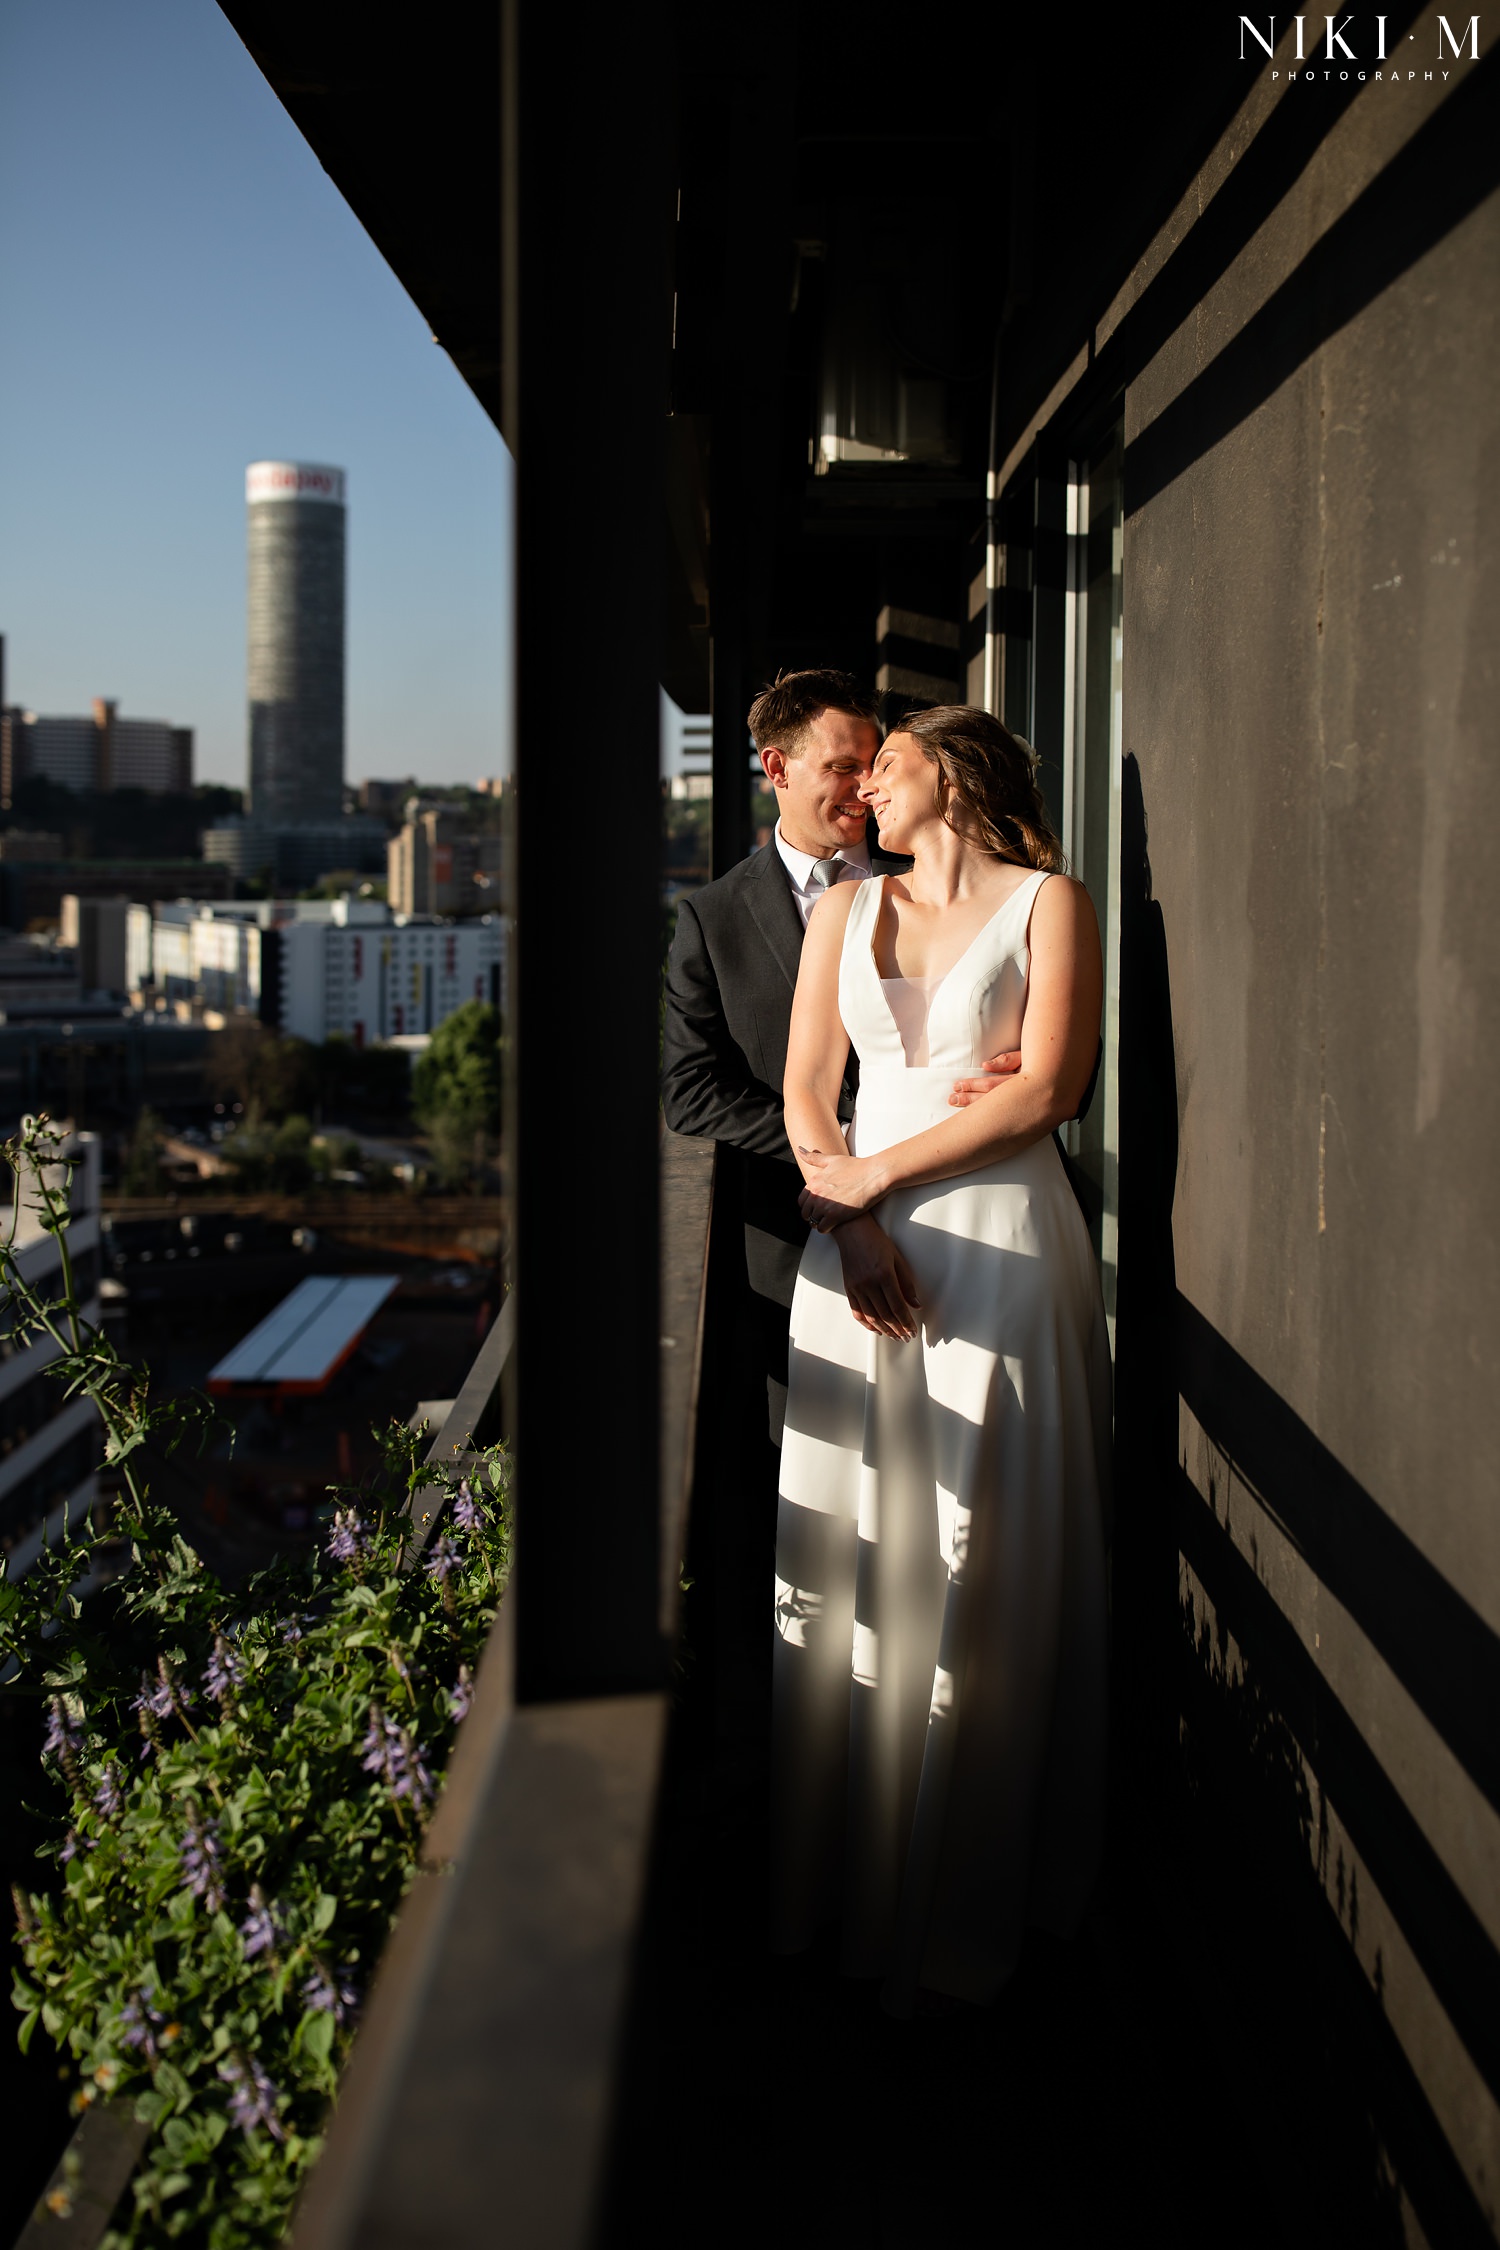 Couple photos in the city after their Johannesburg wedding ceremony at Hallmark House Hotel